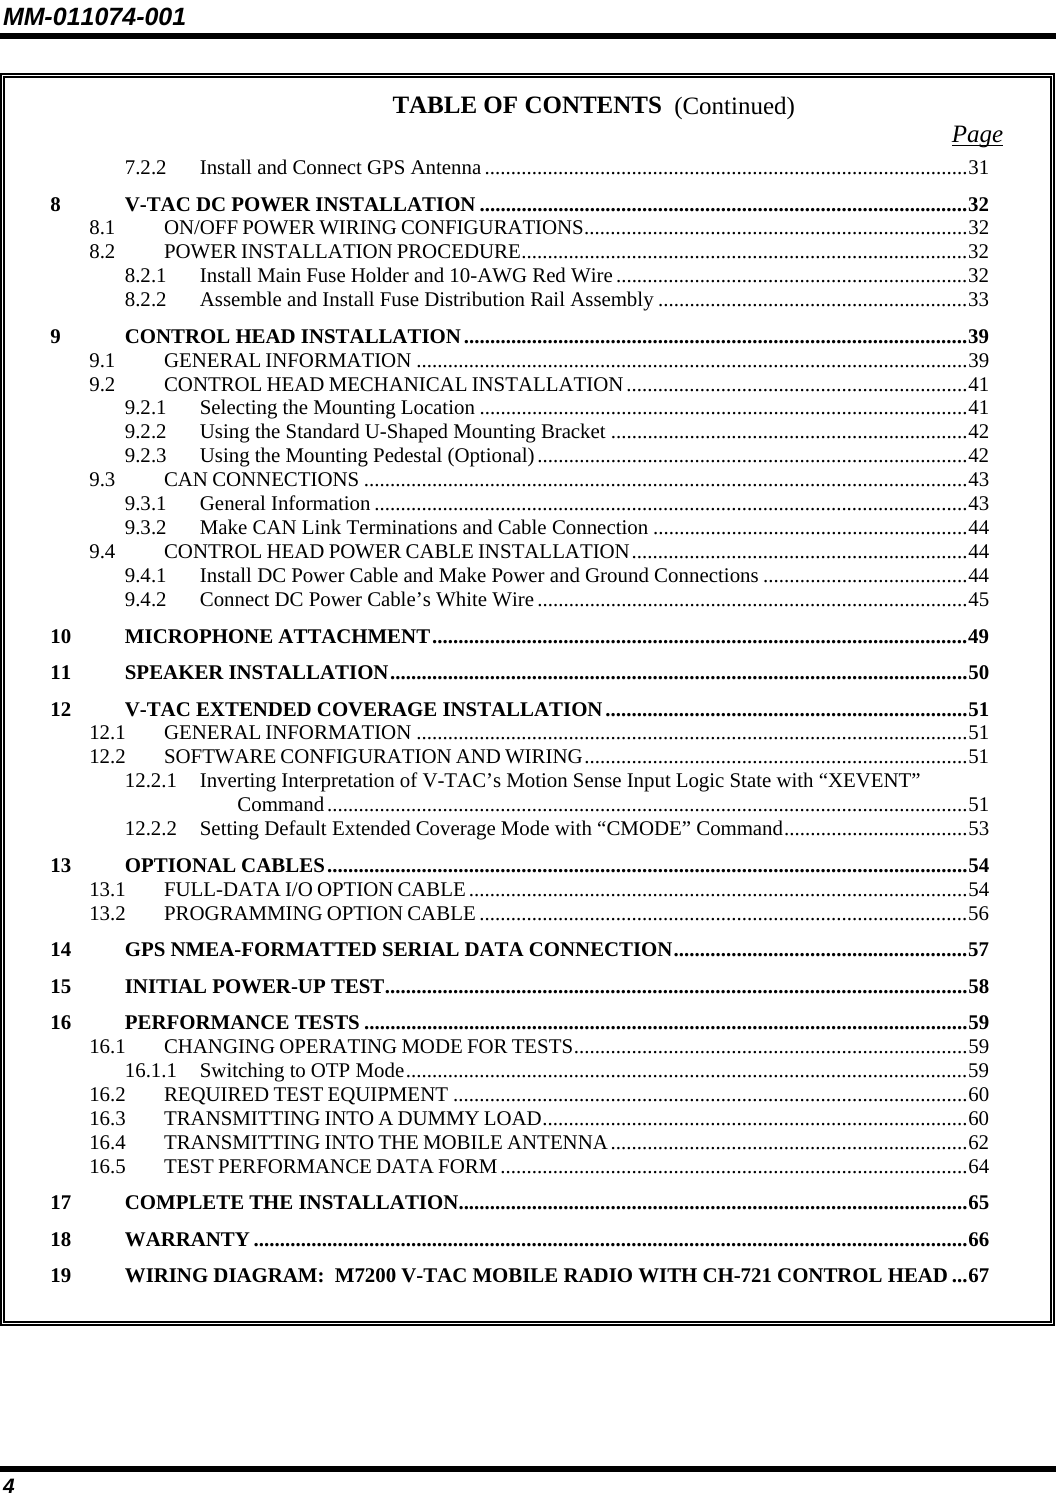 MM-011074-001 4 TABLE OF CONTENTS  Page 7.2.2 Install and Connect GPS Antenna............................................................................................31 8 V-TAC DC POWER INSTALLATION .............................................................................................32 8.1 ON/OFF POWER WIRING CONFIGURATIONS.........................................................................32 8.2 POWER INSTALLATION PROCEDURE.....................................................................................32 8.2.1 Install Main Fuse Holder and 10-AWG Red Wire...................................................................32 8.2.2 Assemble and Install Fuse Distribution Rail Assembly ...........................................................33 9 CONTROL HEAD INSTALLATION................................................................................................39 9.1 GENERAL INFORMATION .........................................................................................................39 9.2 CONTROL HEAD MECHANICAL INSTALLATION.................................................................41 9.2.1 Selecting the Mounting Location .............................................................................................41 9.2.2 Using the Standard U-Shaped Mounting Bracket ....................................................................42 9.2.3 Using the Mounting Pedestal (Optional)..................................................................................42 9.3 CAN CONNECTIONS ...................................................................................................................43 9.3.1 General Information .................................................................................................................43 9.3.2 Make CAN Link Terminations and Cable Connection ............................................................44 9.4 CONTROL HEAD POWER CABLE INSTALLATION................................................................44 9.4.1 Install DC Power Cable and Make Power and Ground Connections .......................................44 9.4.2 Connect DC Power Cable’s White Wire..................................................................................45 10 MICROPHONE ATTACHMENT......................................................................................................49 11 SPEAKER INSTALLATION..............................................................................................................50 12 V-TAC EXTENDED COVERAGE INSTALLATION.....................................................................51 12.1 GENERAL INFORMATION .........................................................................................................51 12.2 SOFTWARE CONFIGURATION AND WIRING.........................................................................51 12.2.1 Inverting Interpretation of V-TAC’s Motion Sense Input Logic State with “XEVENT” Command..........................................................................................................................51 12.2.2 Setting Default Extended Coverage Mode with “CMODE” Command...................................53 13 OPTIONAL CABLES..........................................................................................................................54 13.1 FULL-DATA I/O OPTION CABLE...............................................................................................54 13.2 PROGRAMMING OPTION CABLE .............................................................................................56 14 GPS NMEA-FORMATTED SERIAL DATA CONNECTION........................................................57 15 INITIAL POWER-UP TEST...............................................................................................................58 16 PERFORMANCE TESTS ...................................................................................................................59 16.1 CHANGING OPERATING MODE FOR TESTS...........................................................................59 16.1.1 Switching to OTP Mode...........................................................................................................59 16.2 REQUIRED TEST EQUIPMENT ..................................................................................................60 16.3 TRANSMITTING INTO A DUMMY LOAD.................................................................................60 16.4 TRANSMITTING INTO THE MOBILE ANTENNA....................................................................62 16.5 TEST PERFORMANCE DATA FORM.........................................................................................64 17 COMPLETE THE INSTALLATION.................................................................................................65 18 WARRANTY ........................................................................................................................................66 19 WIRING DIAGRAM:  M7200 V-TAC MOBILE RADIO WITH CH-721 CONTROL HEAD ...67   (Continued) 